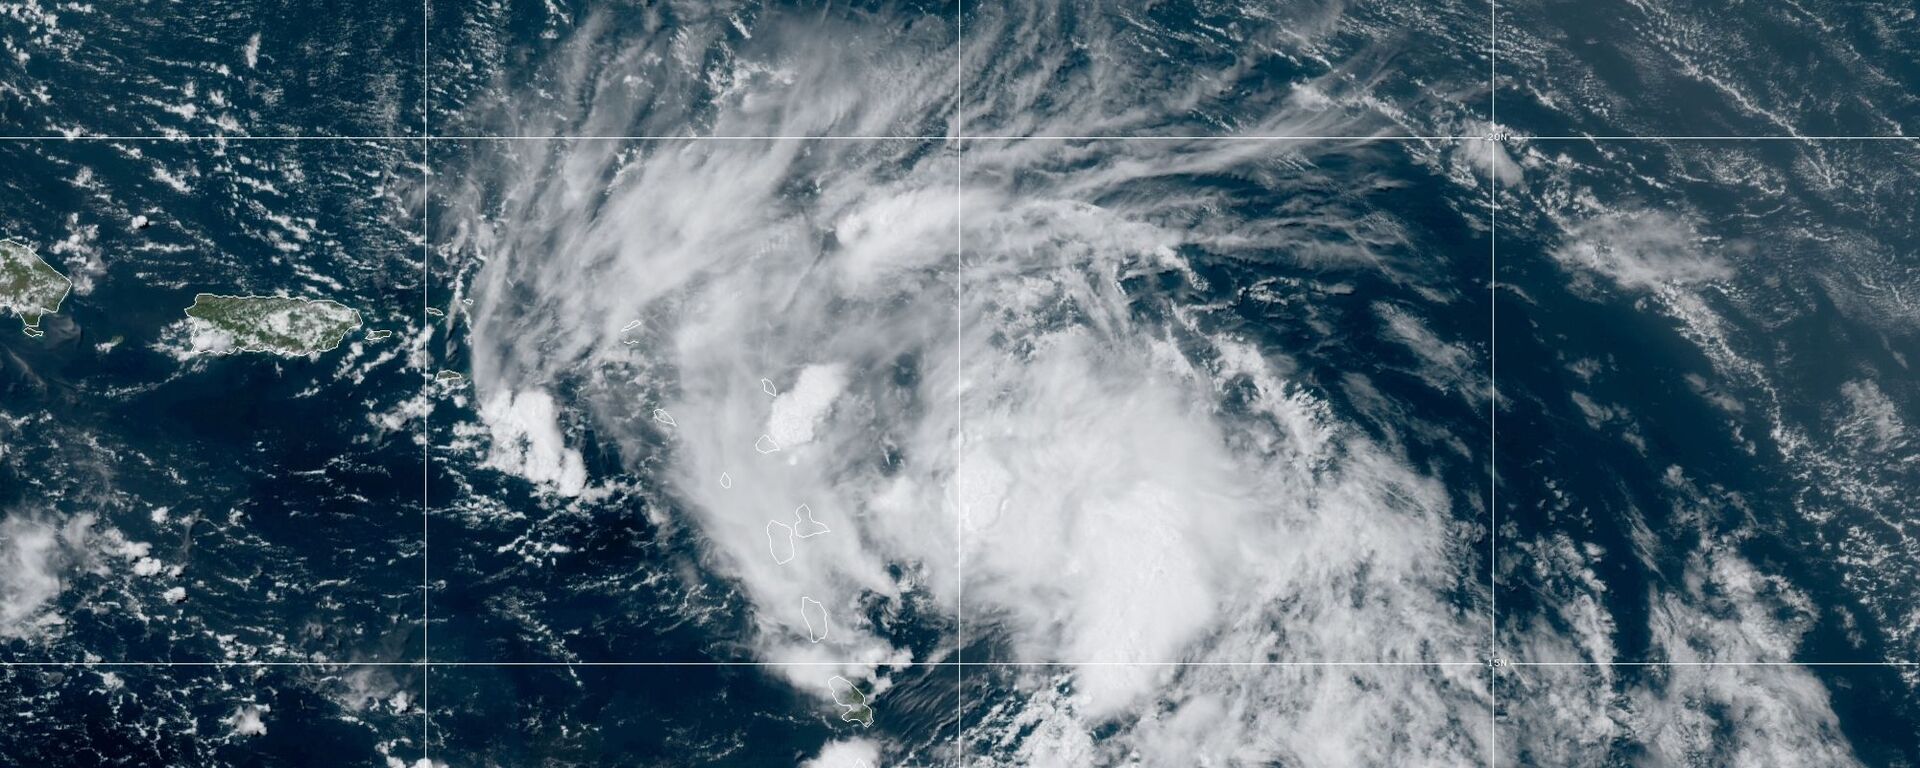 Satellite image released by the National Oceanic and Atmospheric Administration (NOAA) shows Tropical Storm Laura in the North Atlantic Ocean, Friday, Aug. 21, 2020.  - Sputnik International, 1920, 23.08.2020